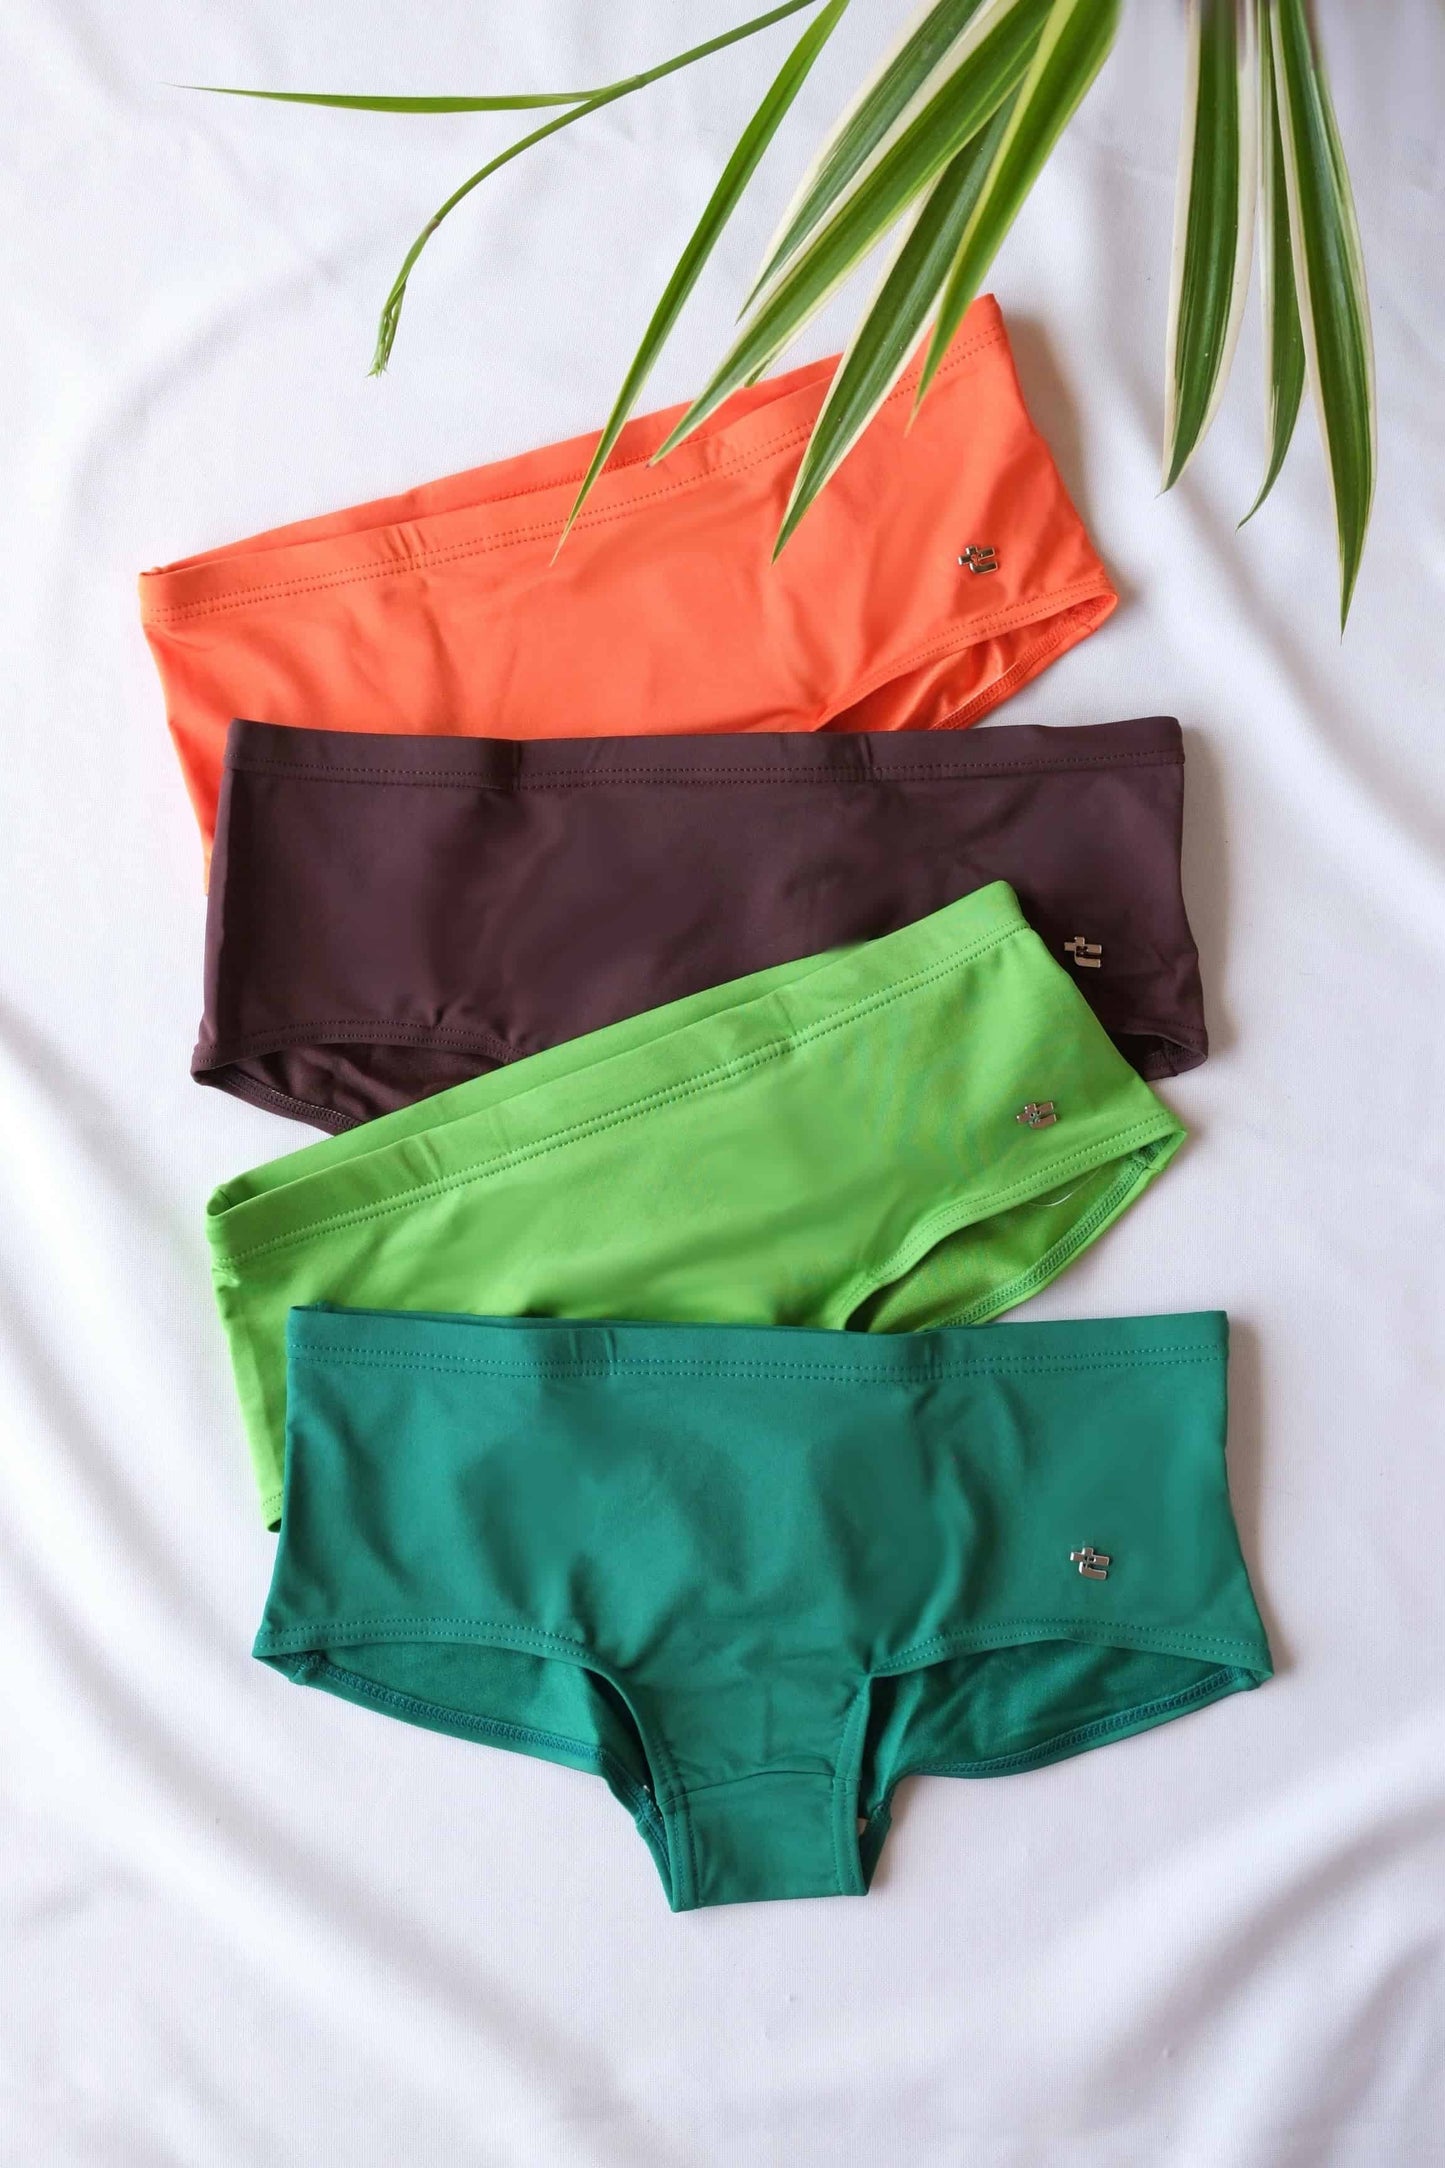 Orange brown lime green and green Tropic vintage 70s briefs on white background